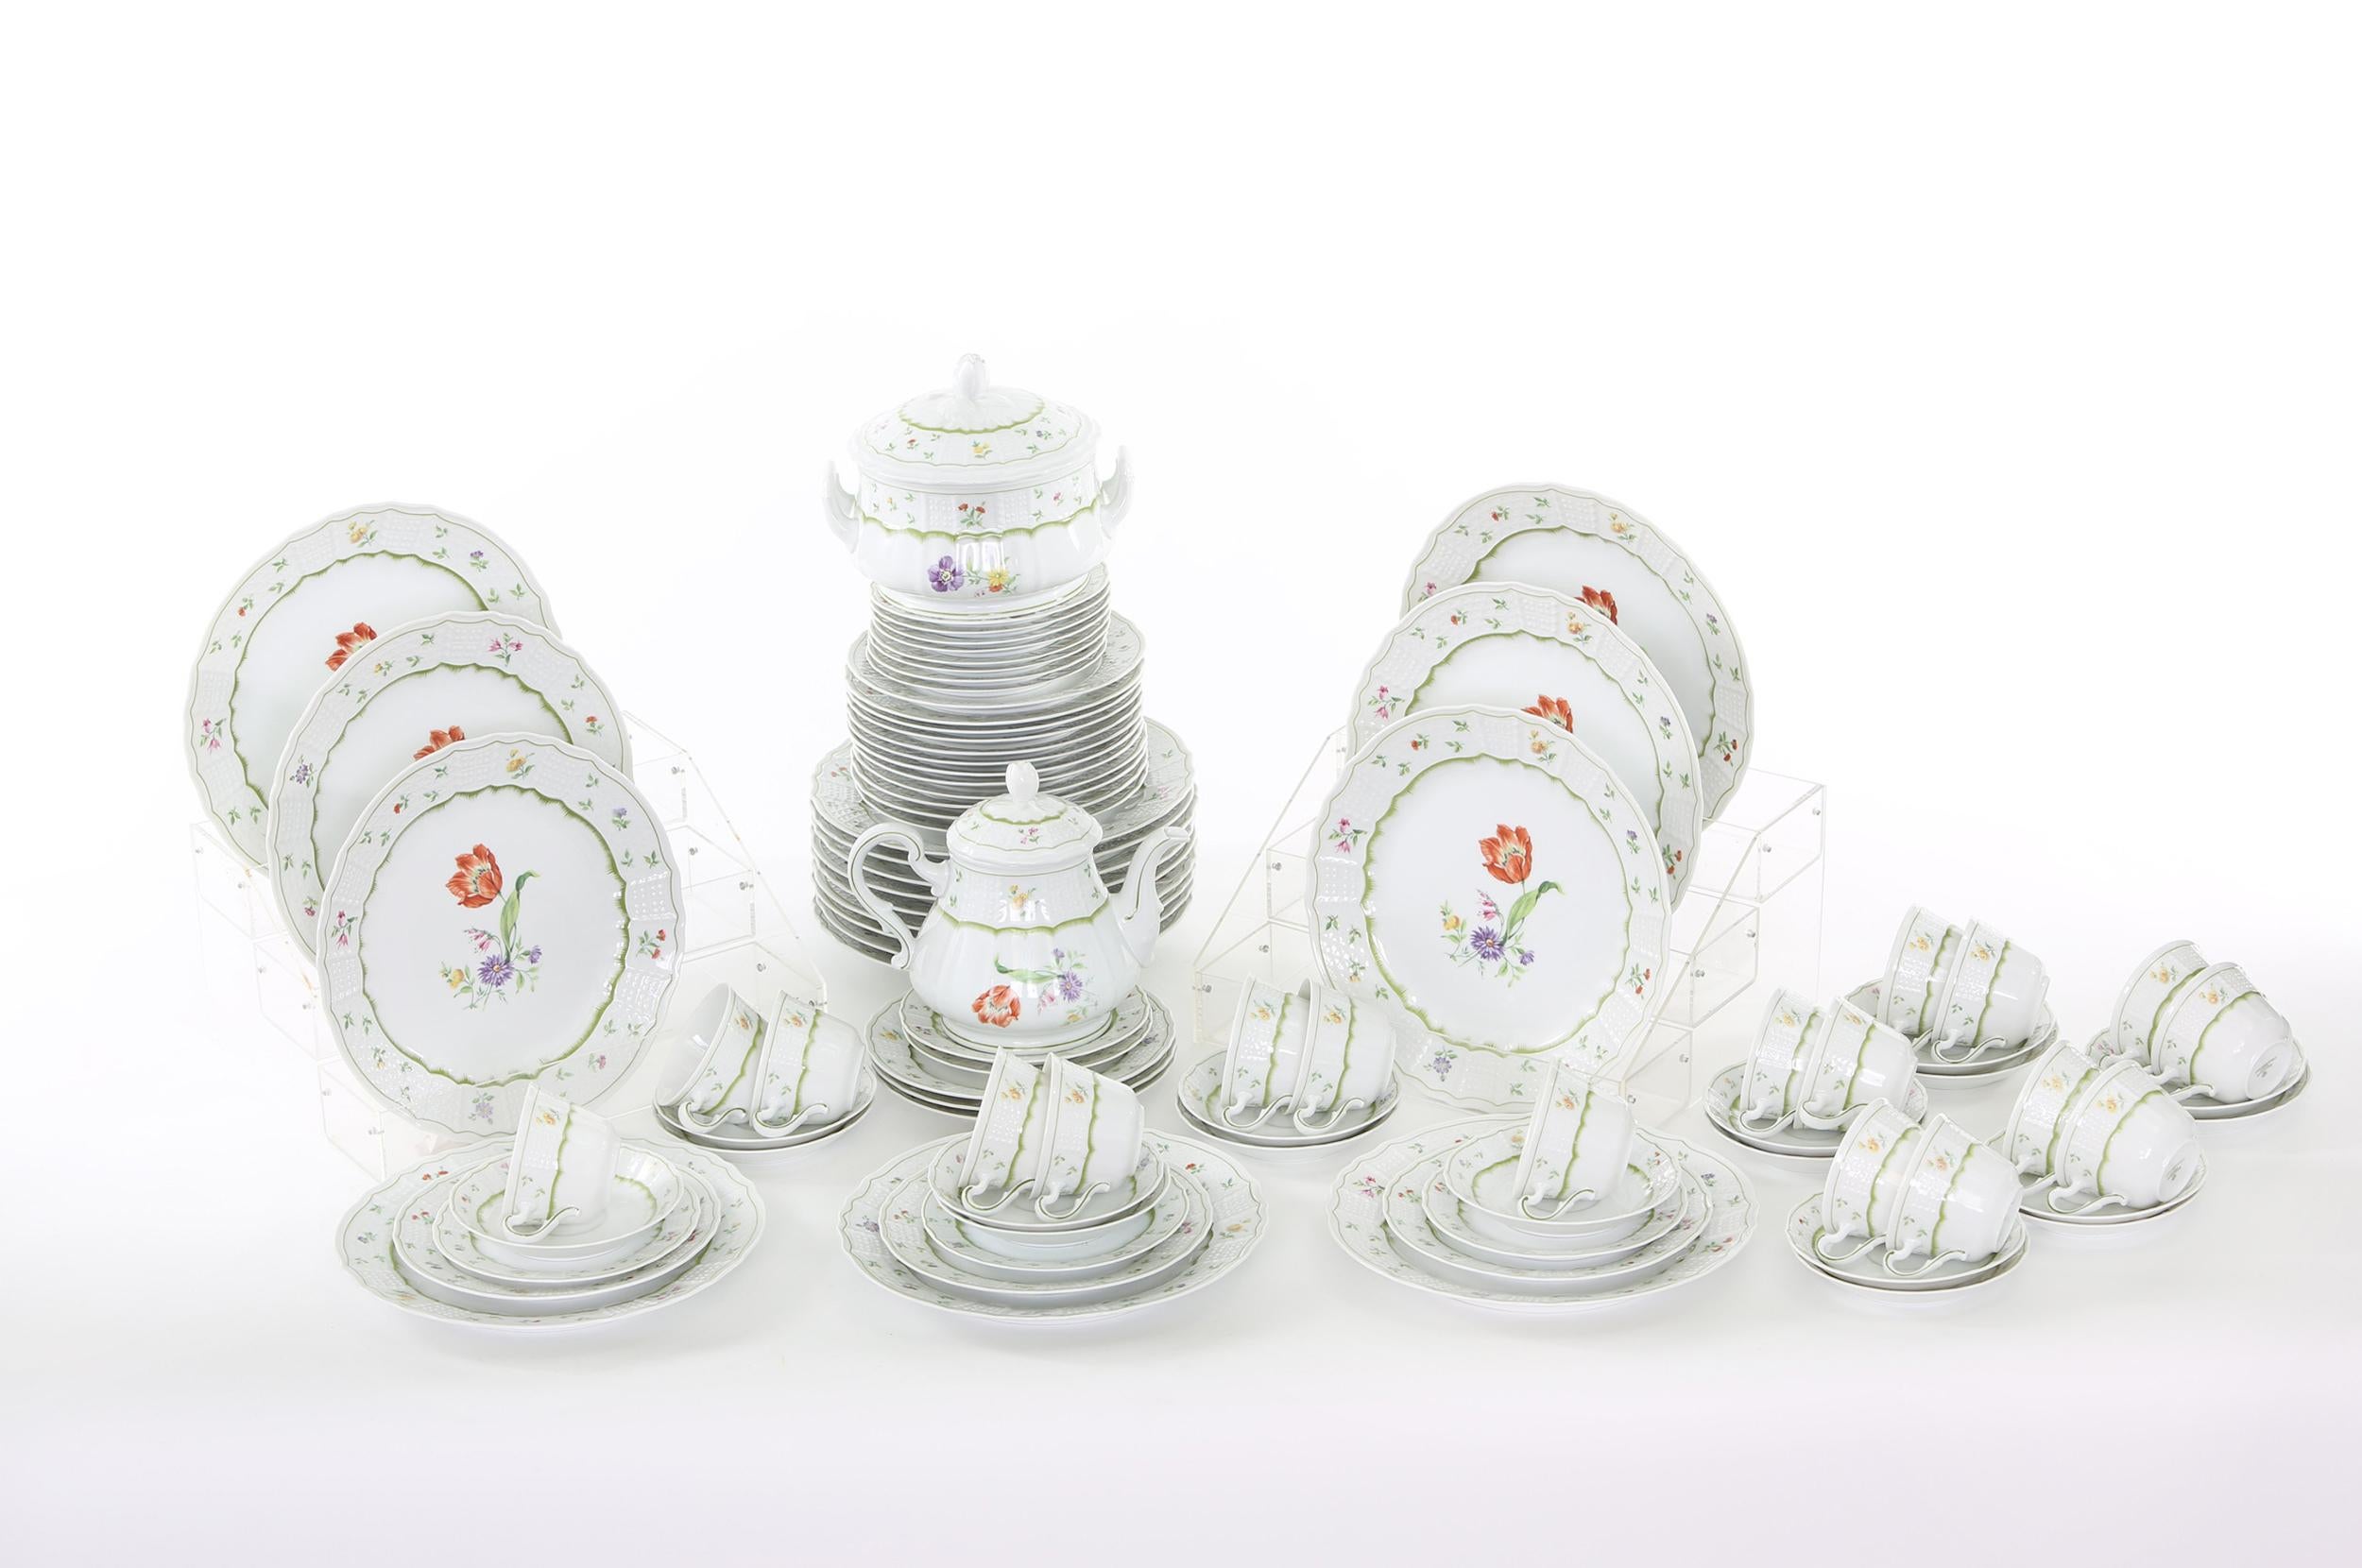 German Porcelain Dinner Service For Eighteen People For Sale 4